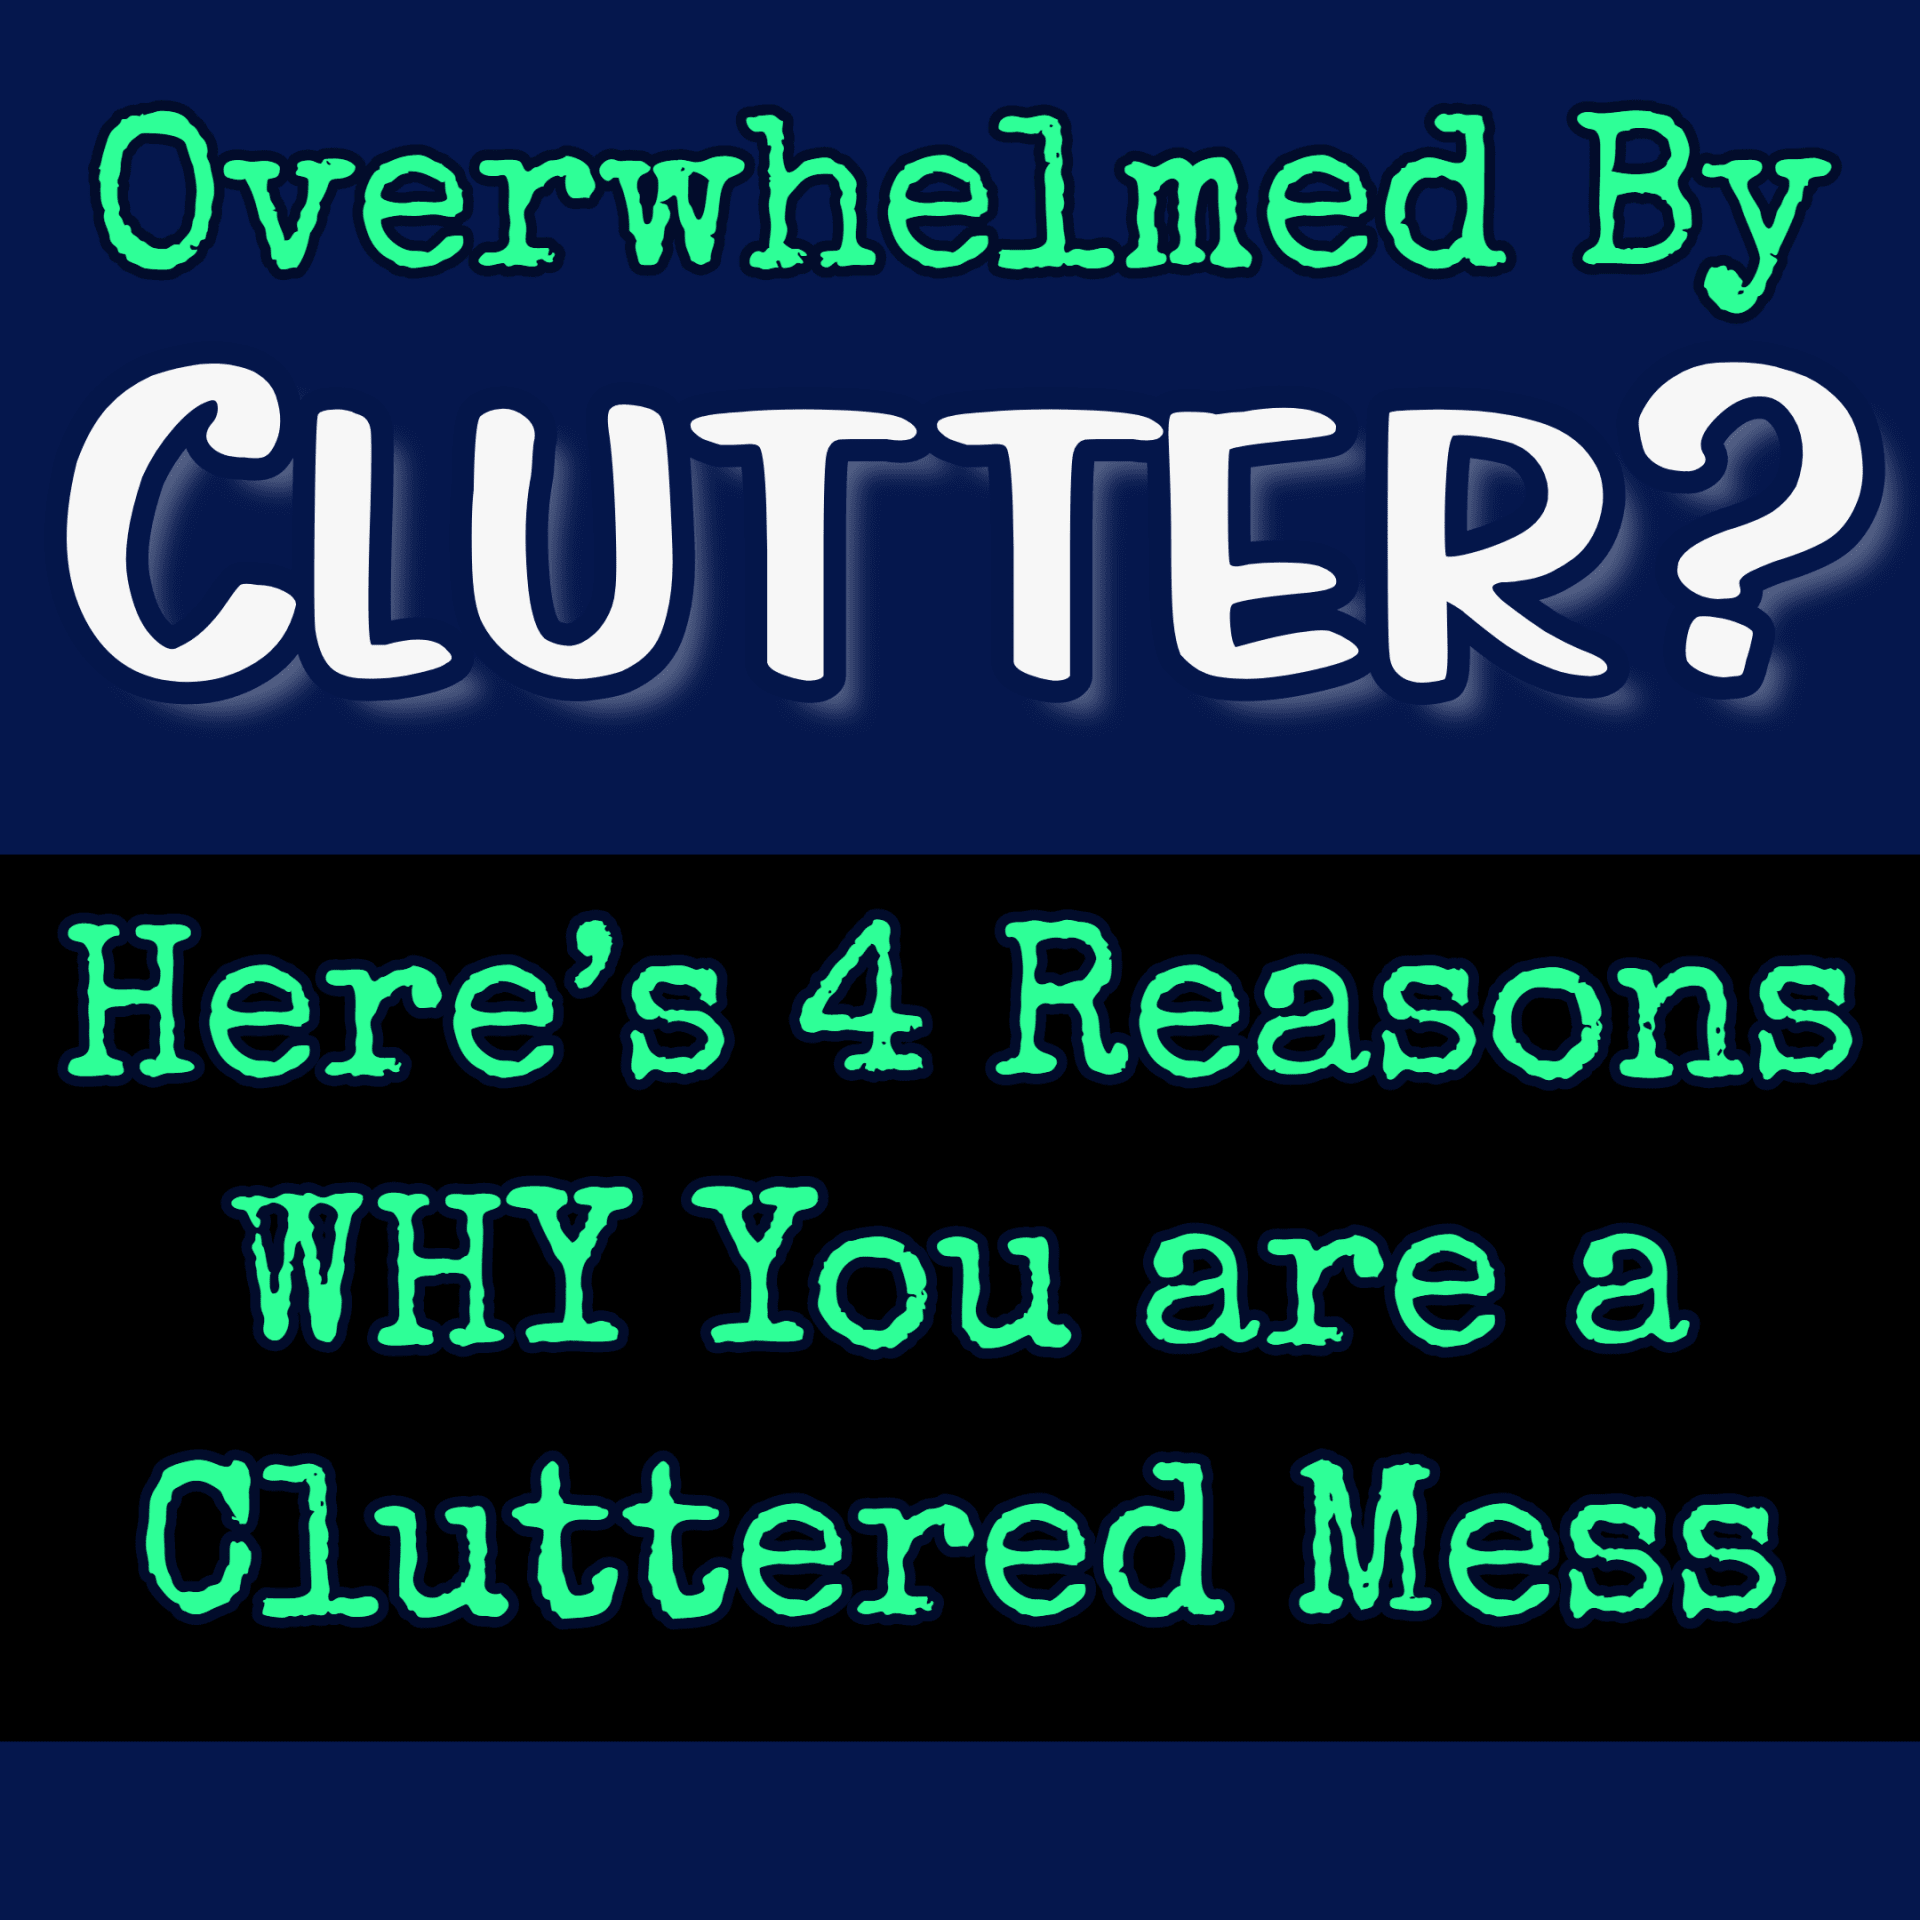 Truth is, clutter happens to even the best of us – BUT some of us are just designed by nature to have a cluttered mess lifestyle. The good news is, we don’t HAVE to be messy people in messy homes who are overwhelmed by the clutter.